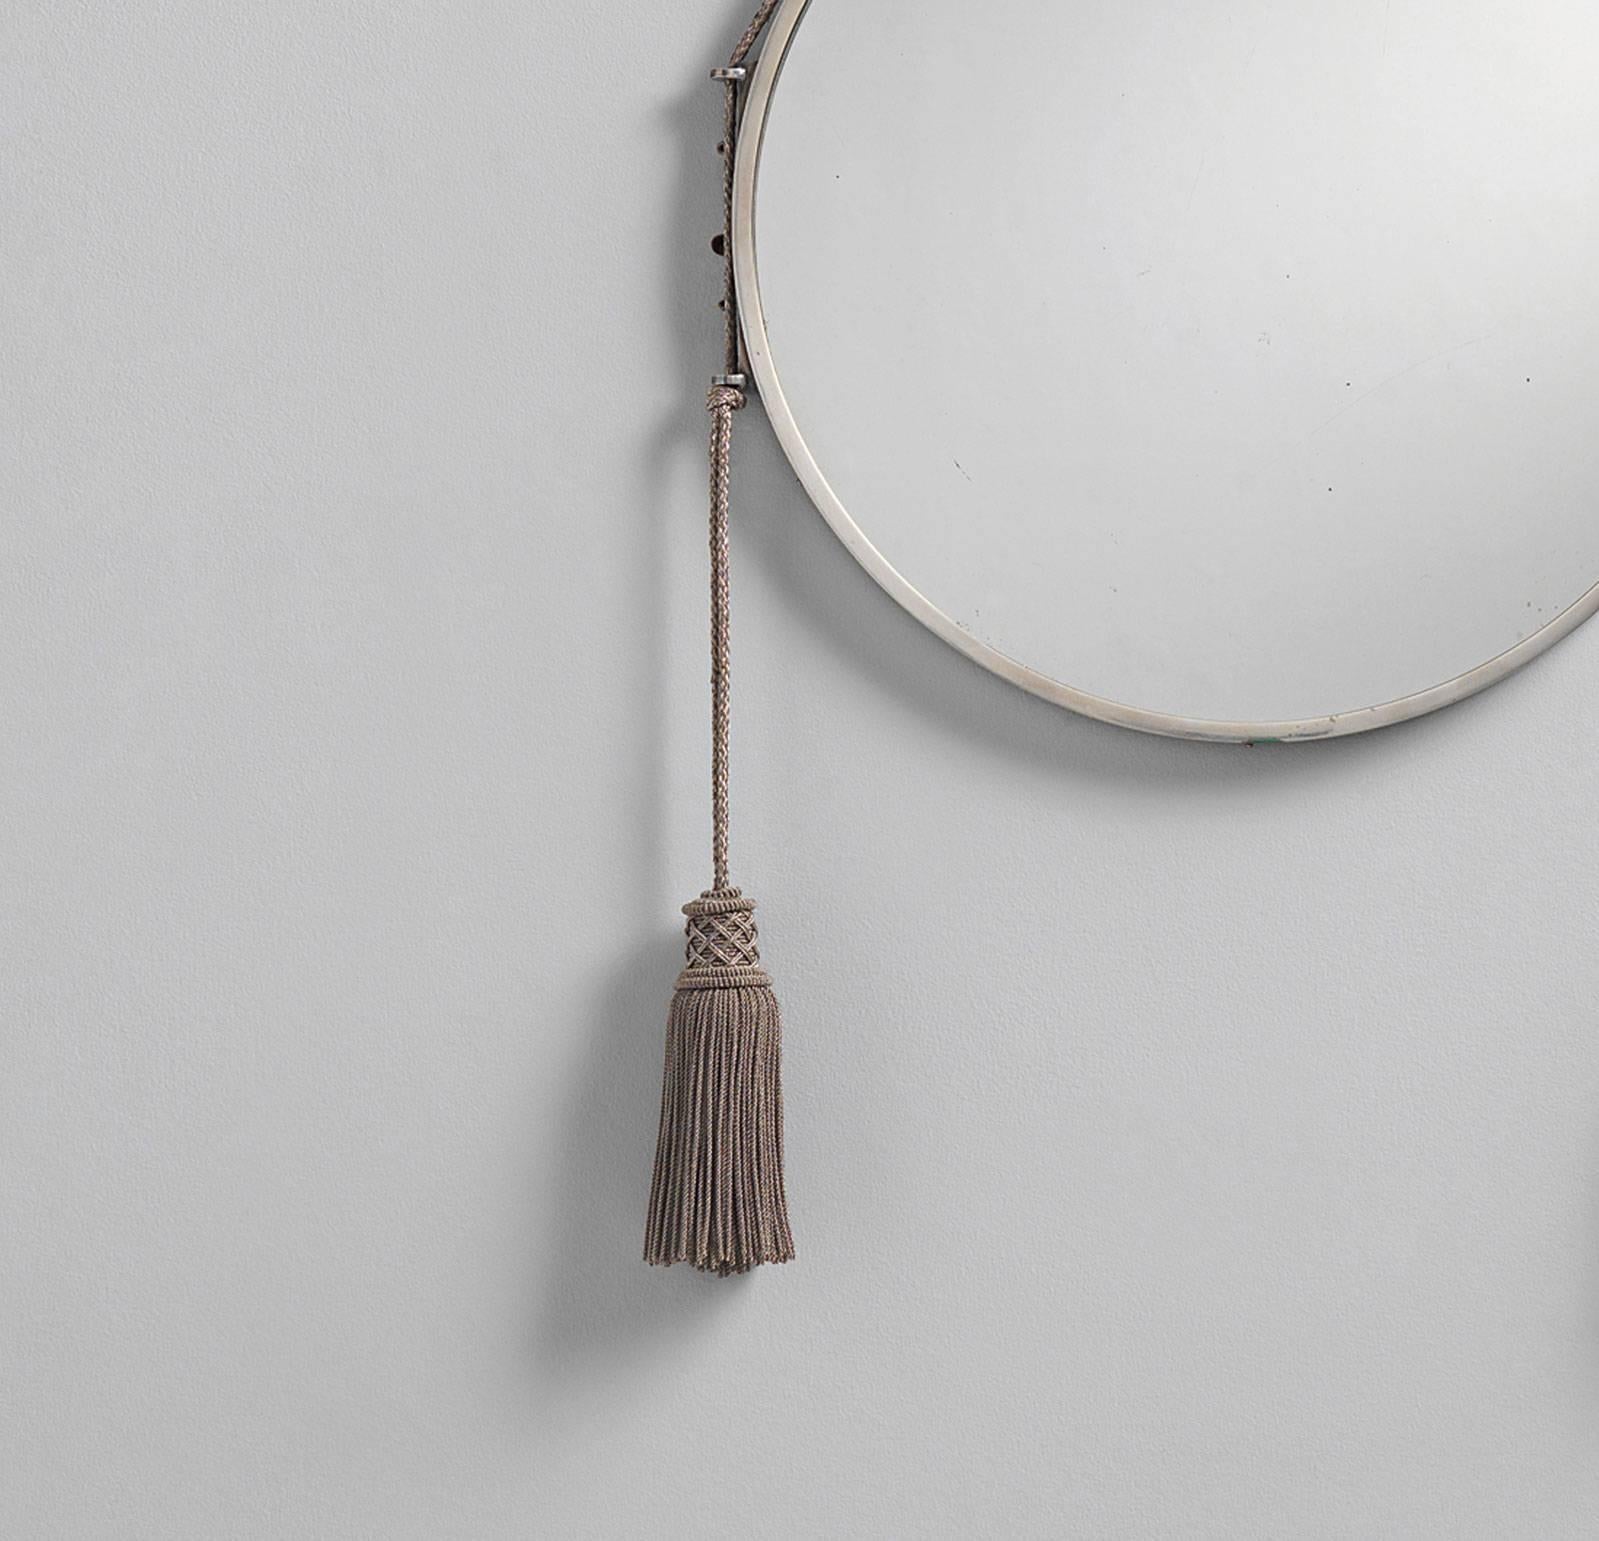 An original Art Deco mirror with tassels by Emile-Jacques Ruhlmann, circa 1920. Made entirely from silver-plated bronze with hand woven passementarie detail. Appearance and wear consistent with age - minor scratching on mirror face.